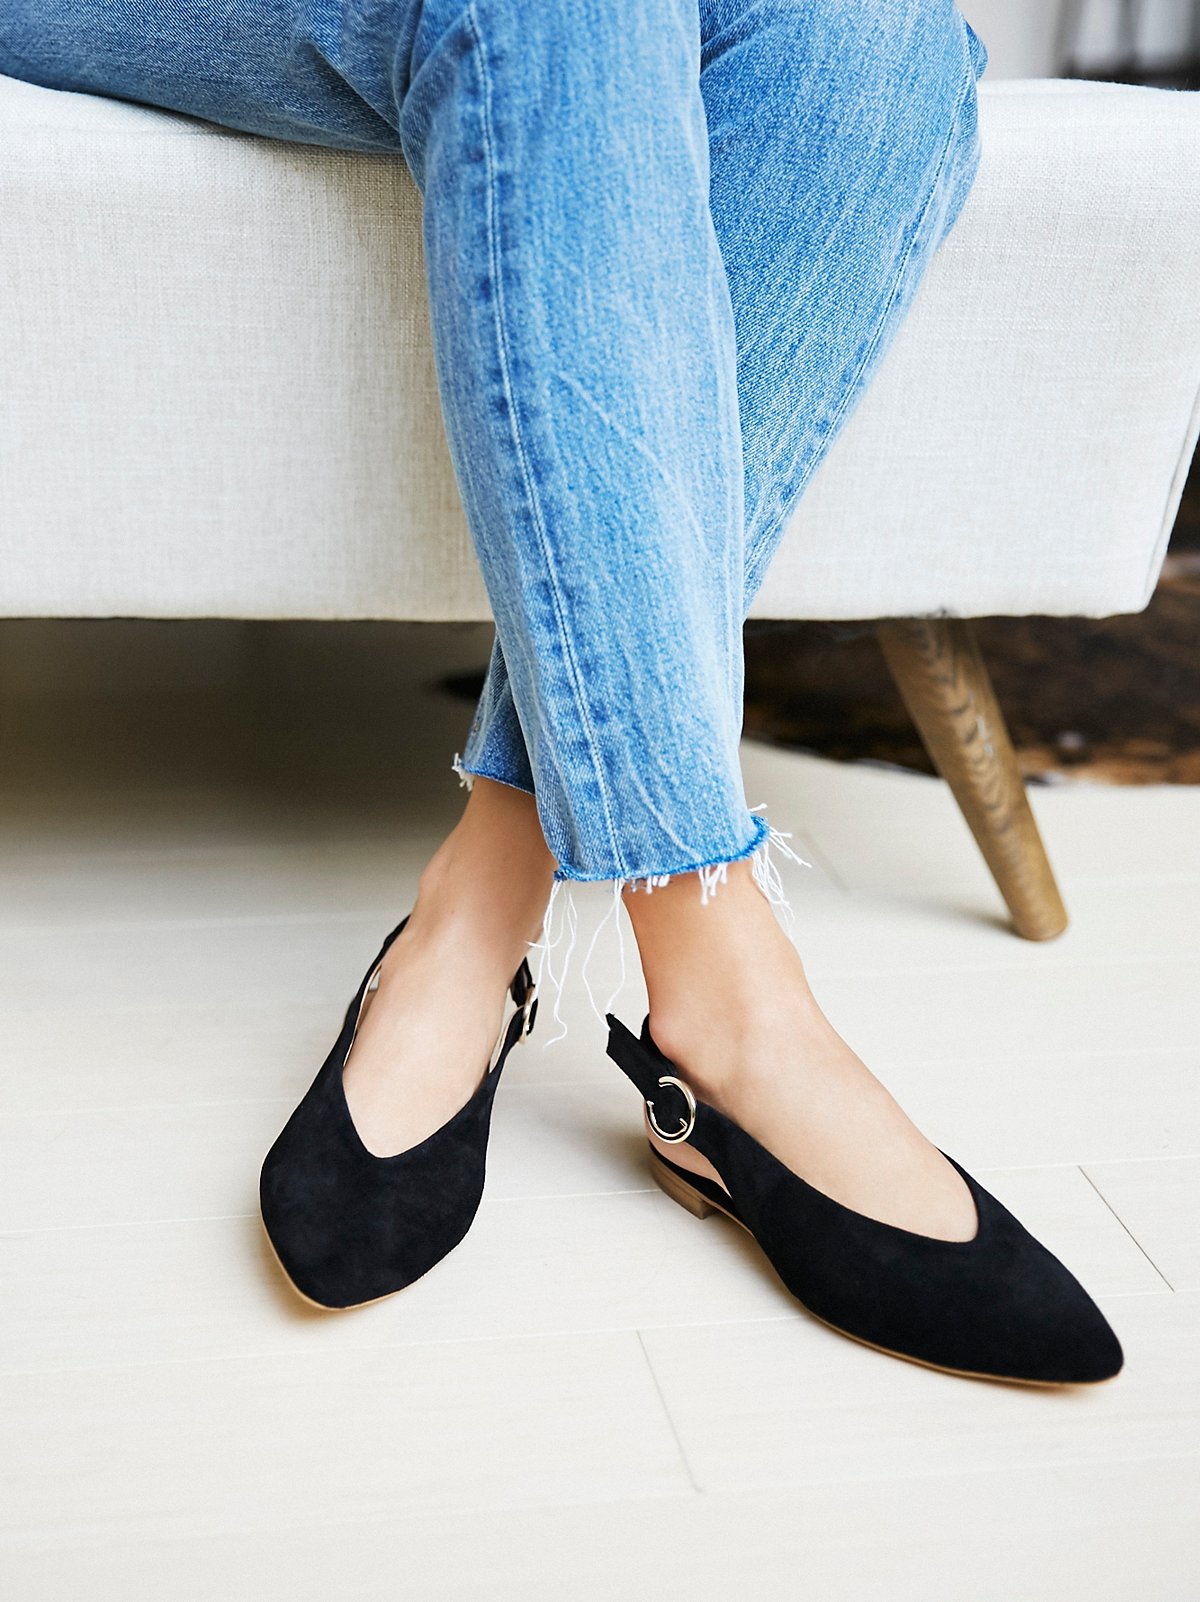 frayed hem jeans and flat shoes 